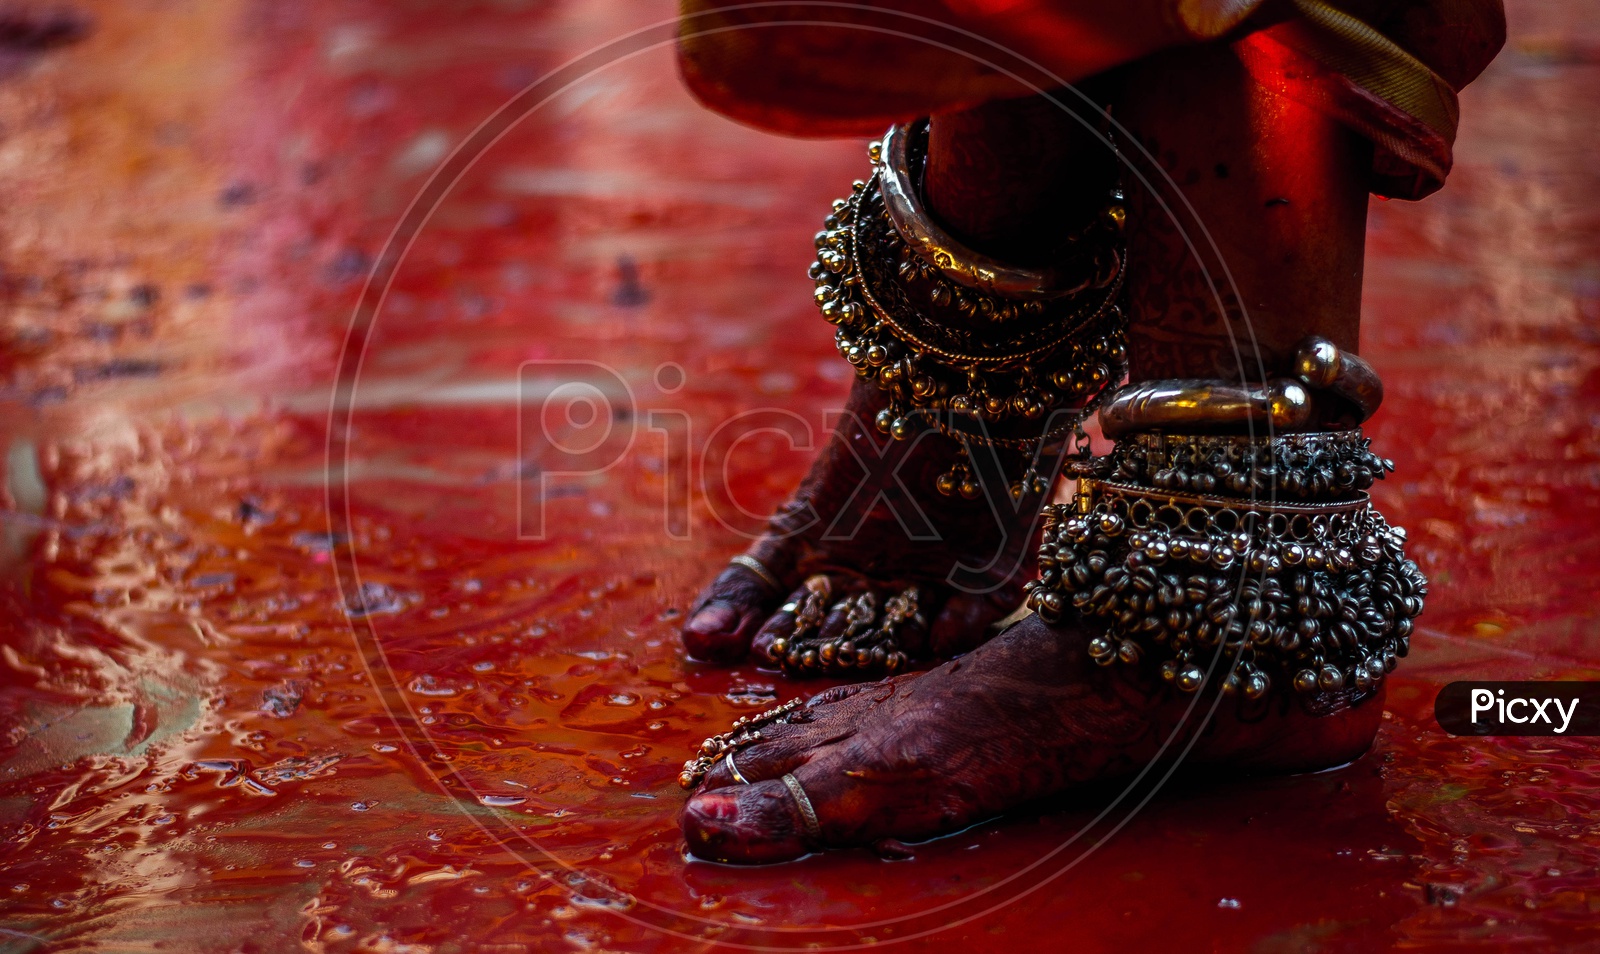 Indian Traditional Woman Wearing Anklets On Legs In Lathmar Holi